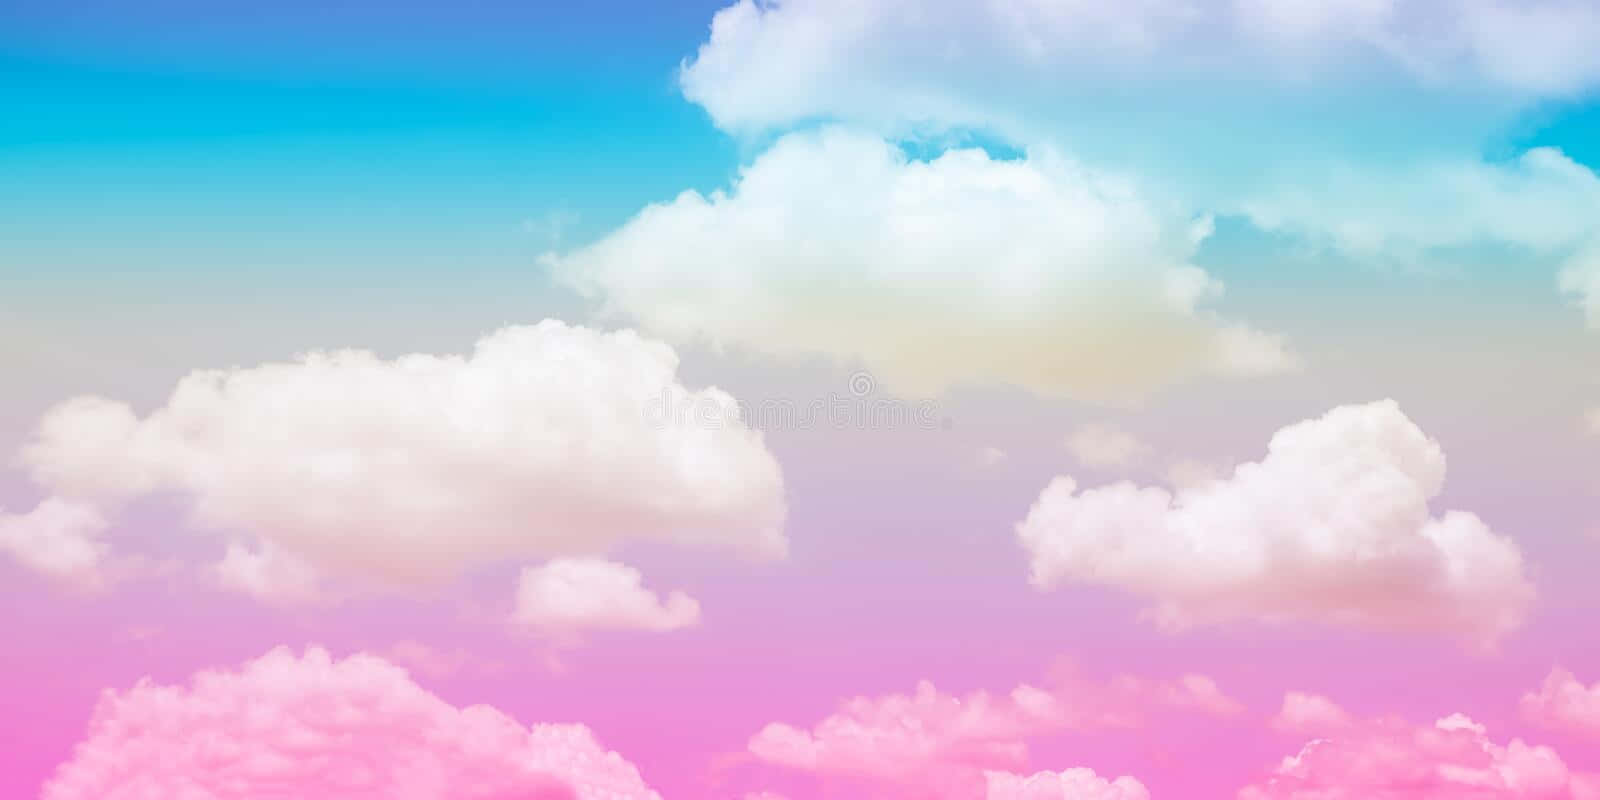 [100+] Pink And Blue Clouds Wallpapers | Wallpapers.com